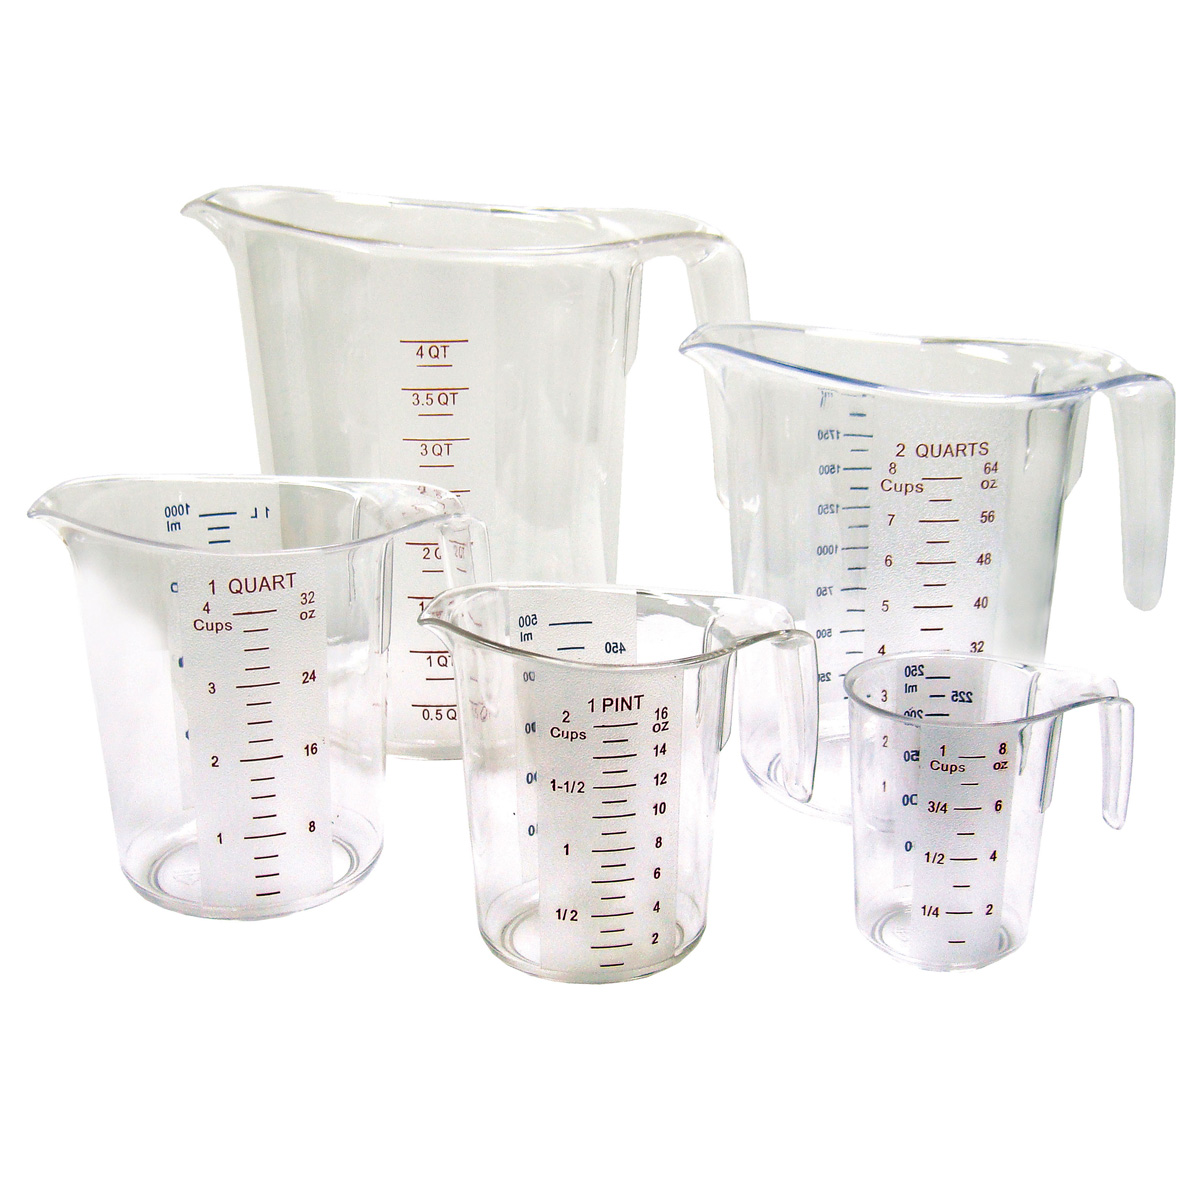 Winware by Winco PMCP-200 Polycarbonate Measuring Cup - 2 Qt. image 1